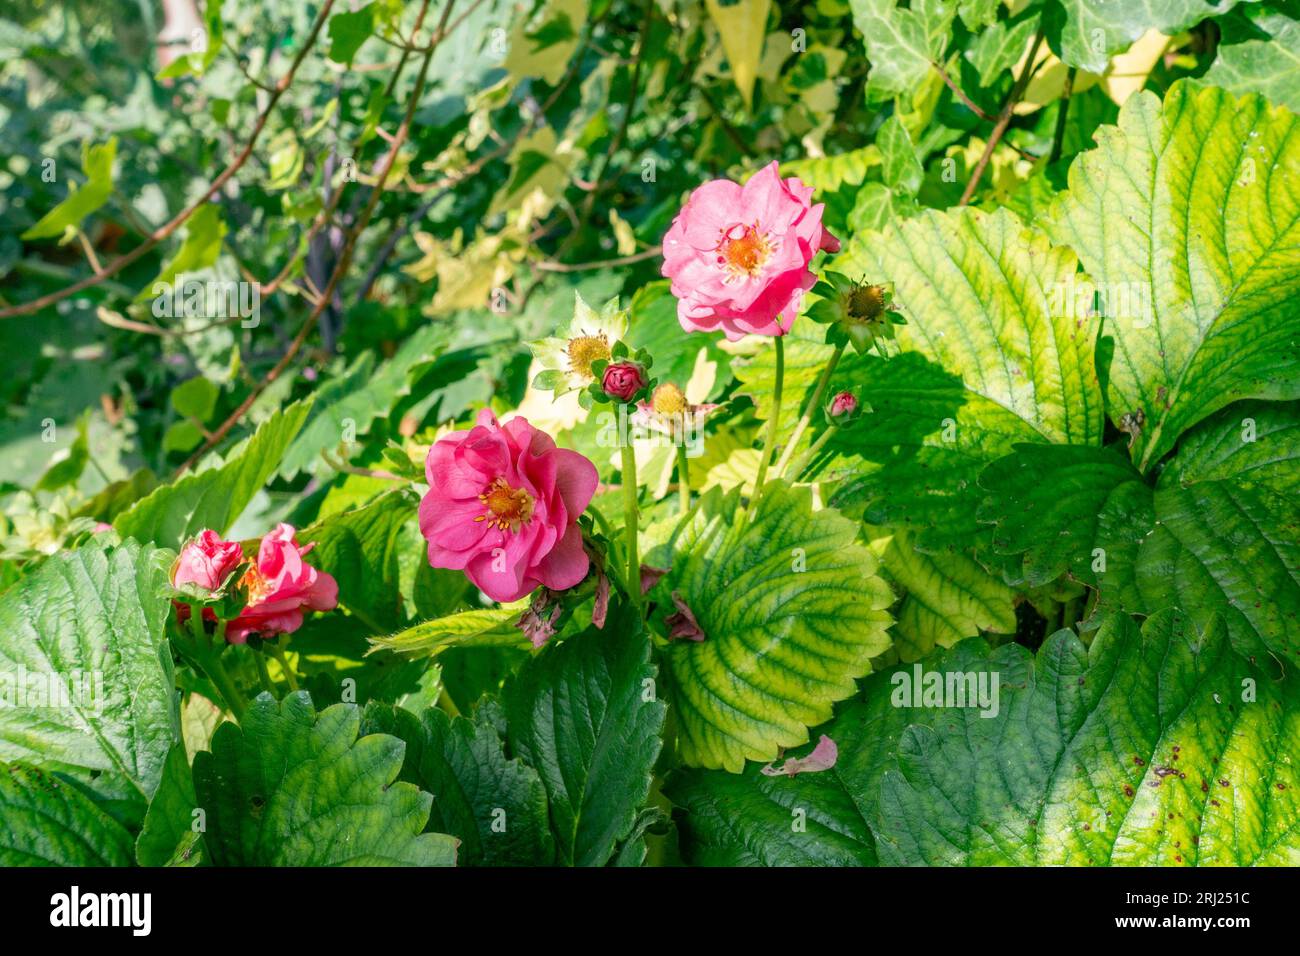 Strawberry 'Summer Breeze Cherry' growing and flowering in a residential garden with pink flowers. Stock Photo